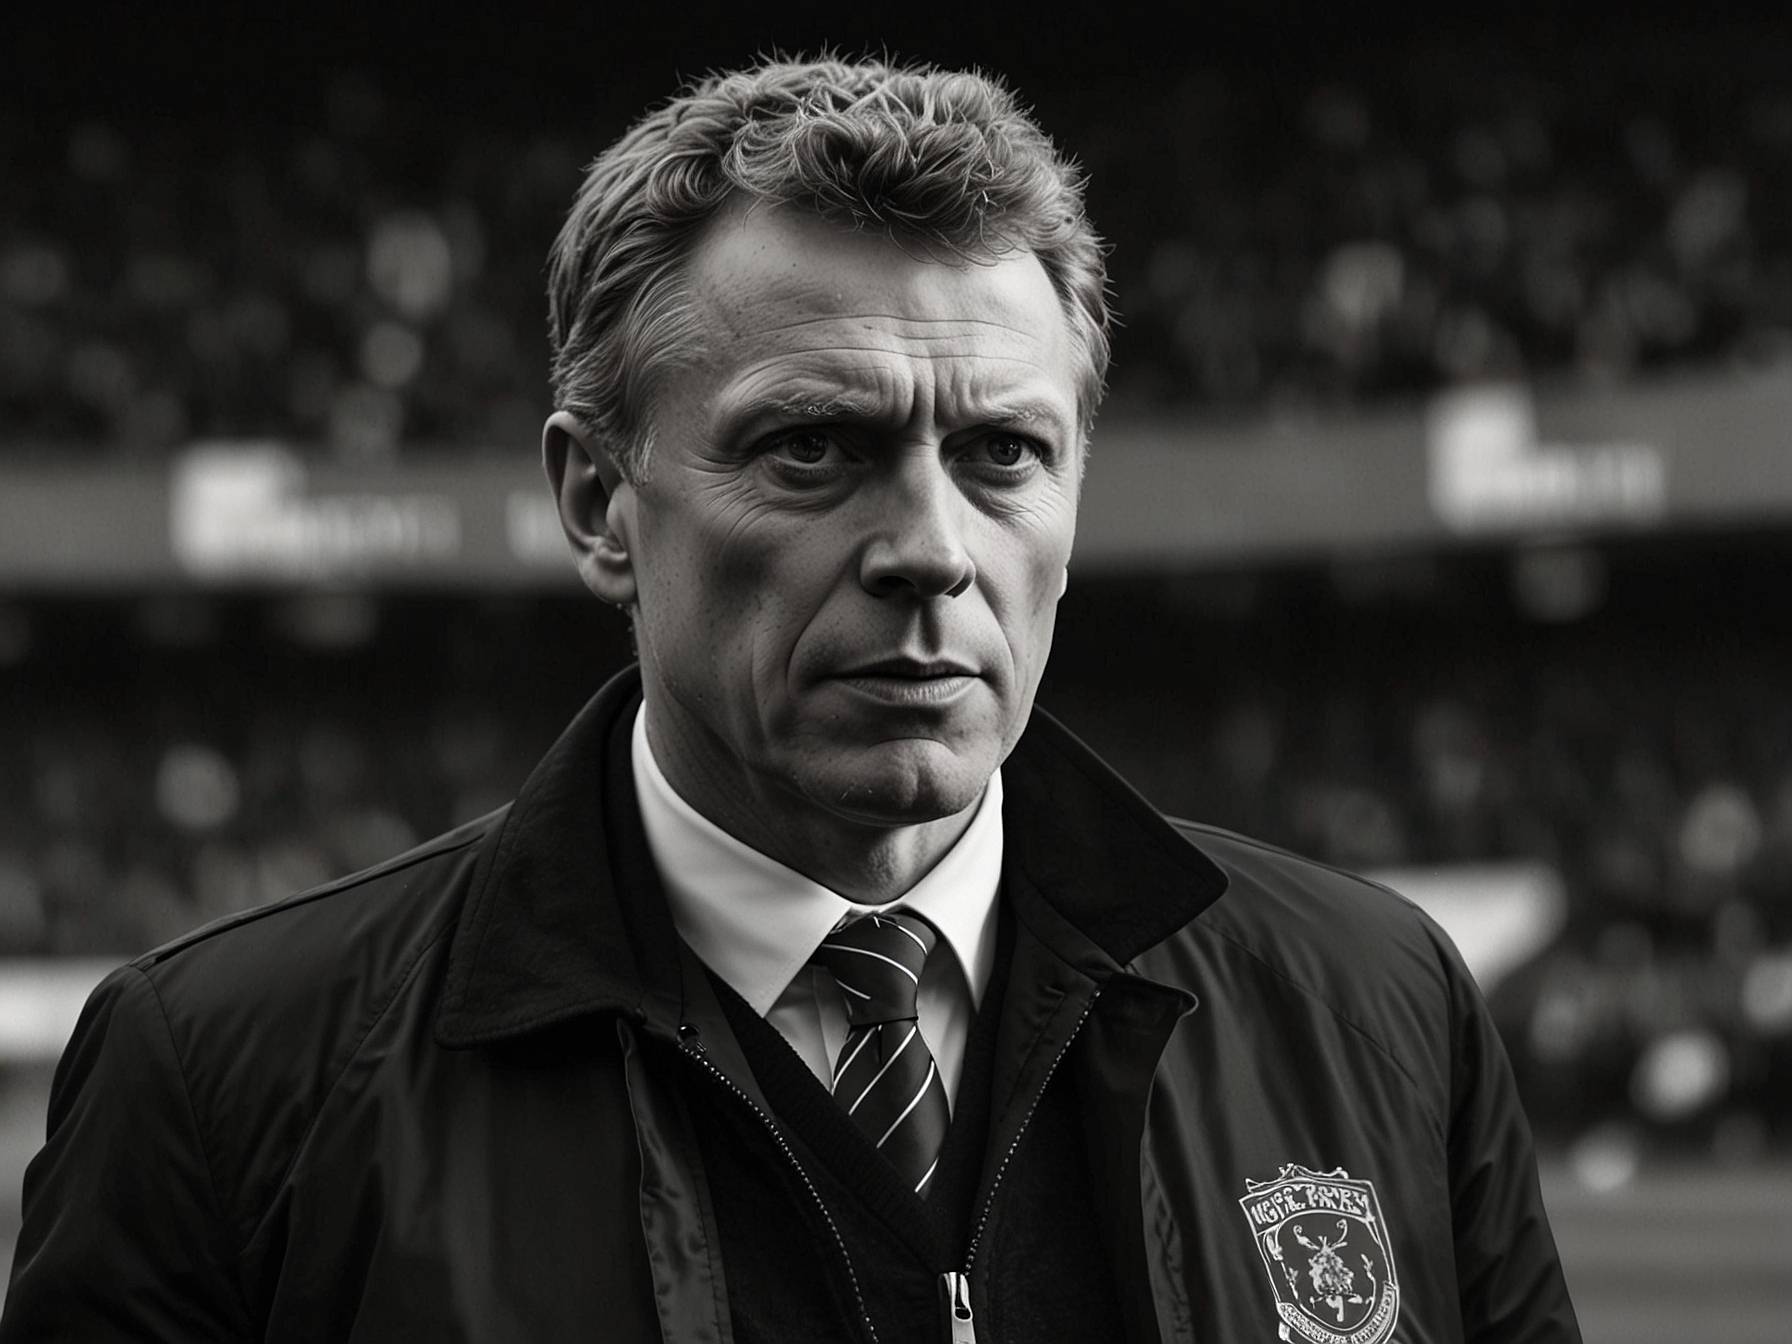 Former West Ham United manager David Moyes on the sidelines, analyzing the game and providing tactical instructions. His focused demeanor underscores his strategic insights into maximizing McTominay's impact for Scotland.